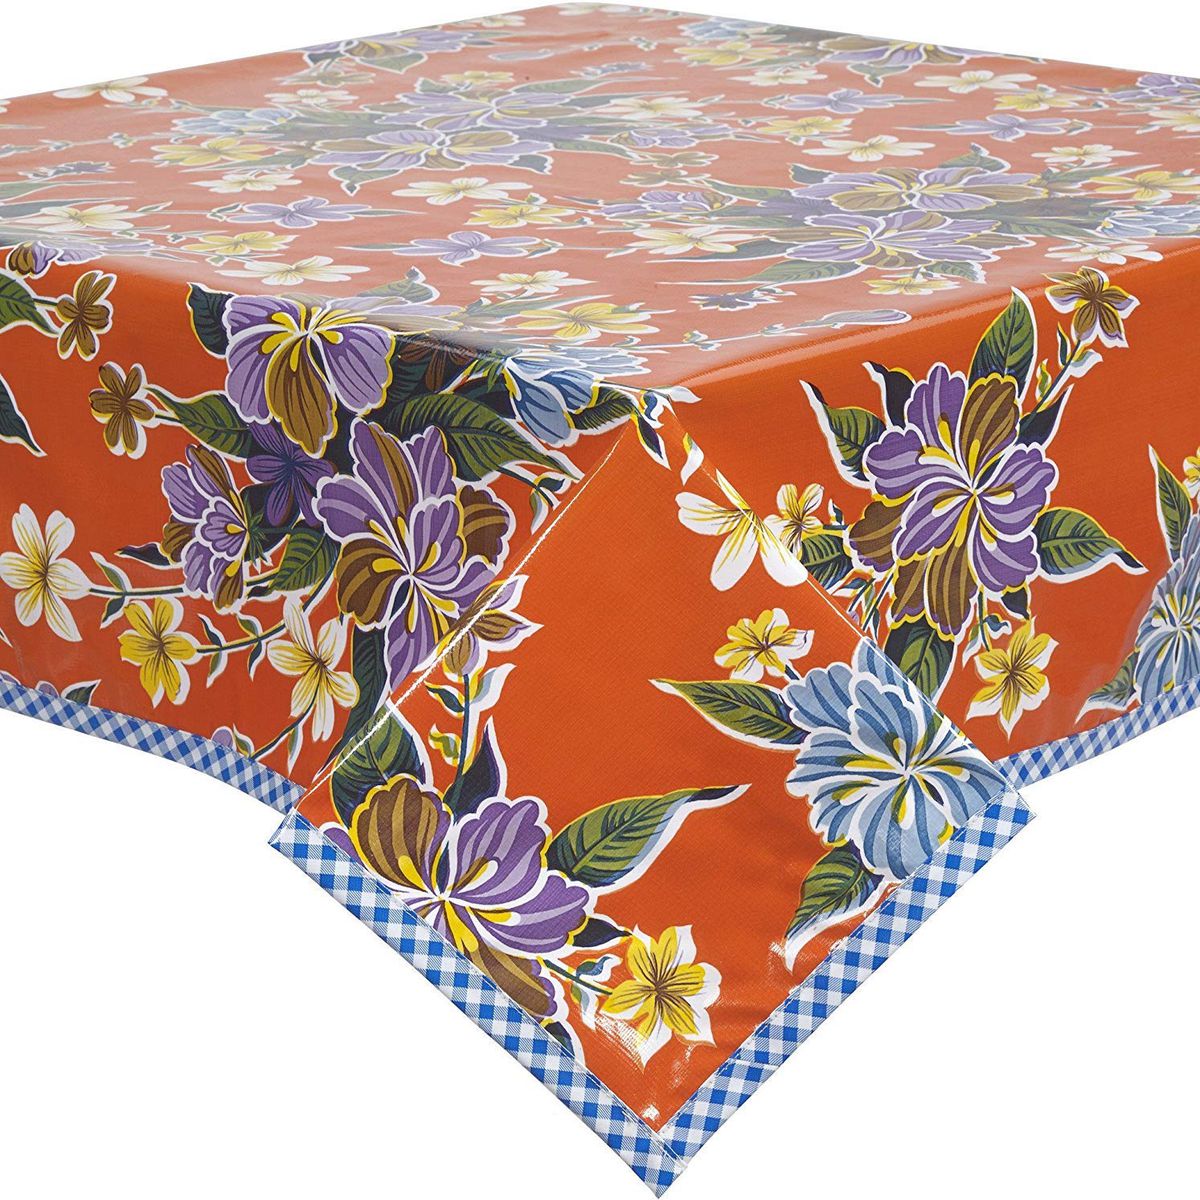 An orange floral oilcloth tablecloth with gingham trim